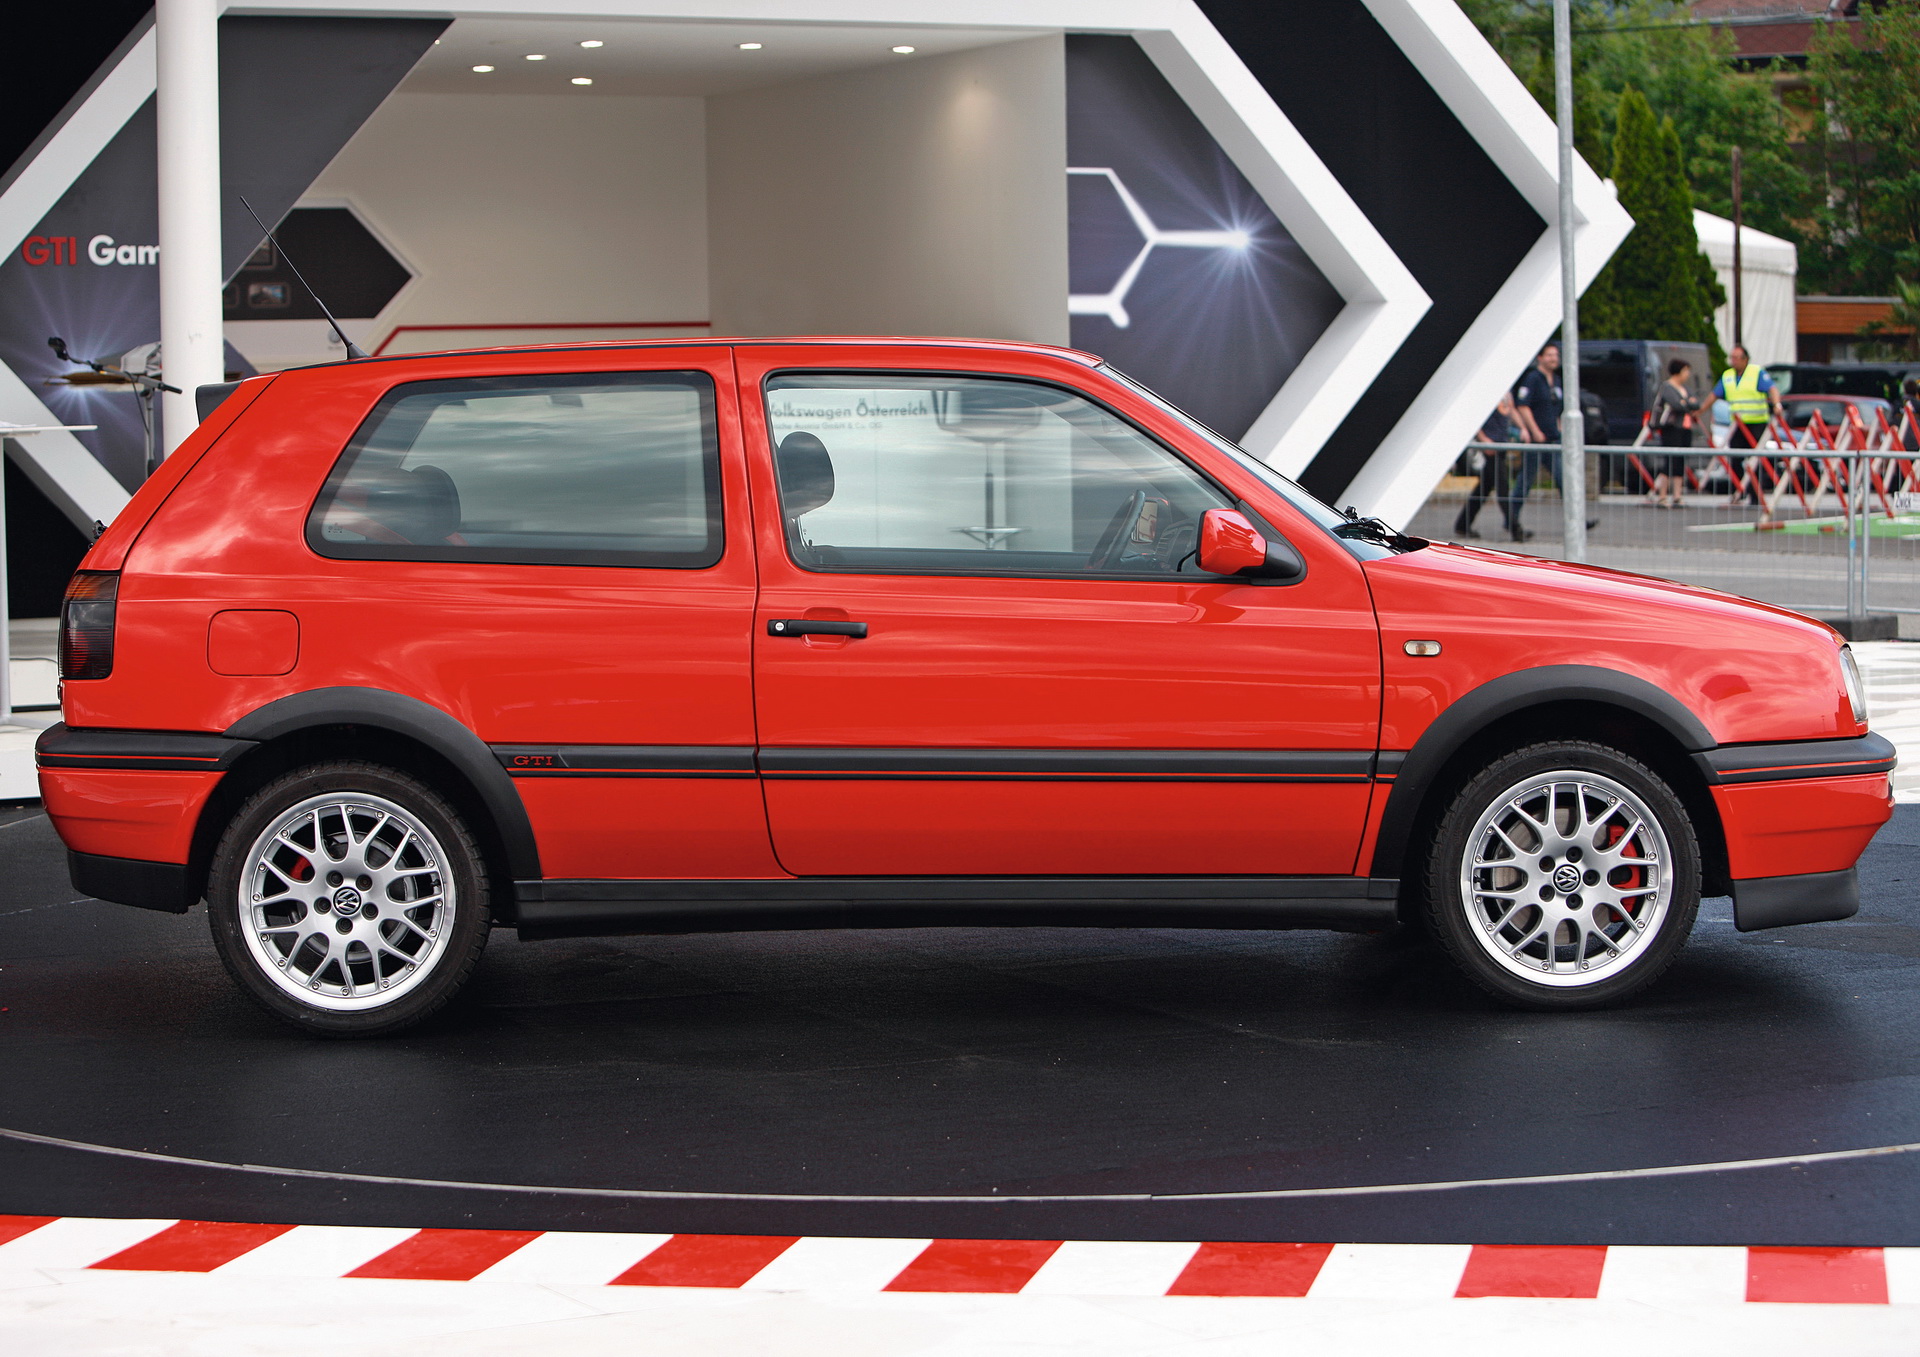 VW Golf Countdown: 1991-1996 Mk3 Was Full Of Safety Firsts But Not The Most  Memorable Drive